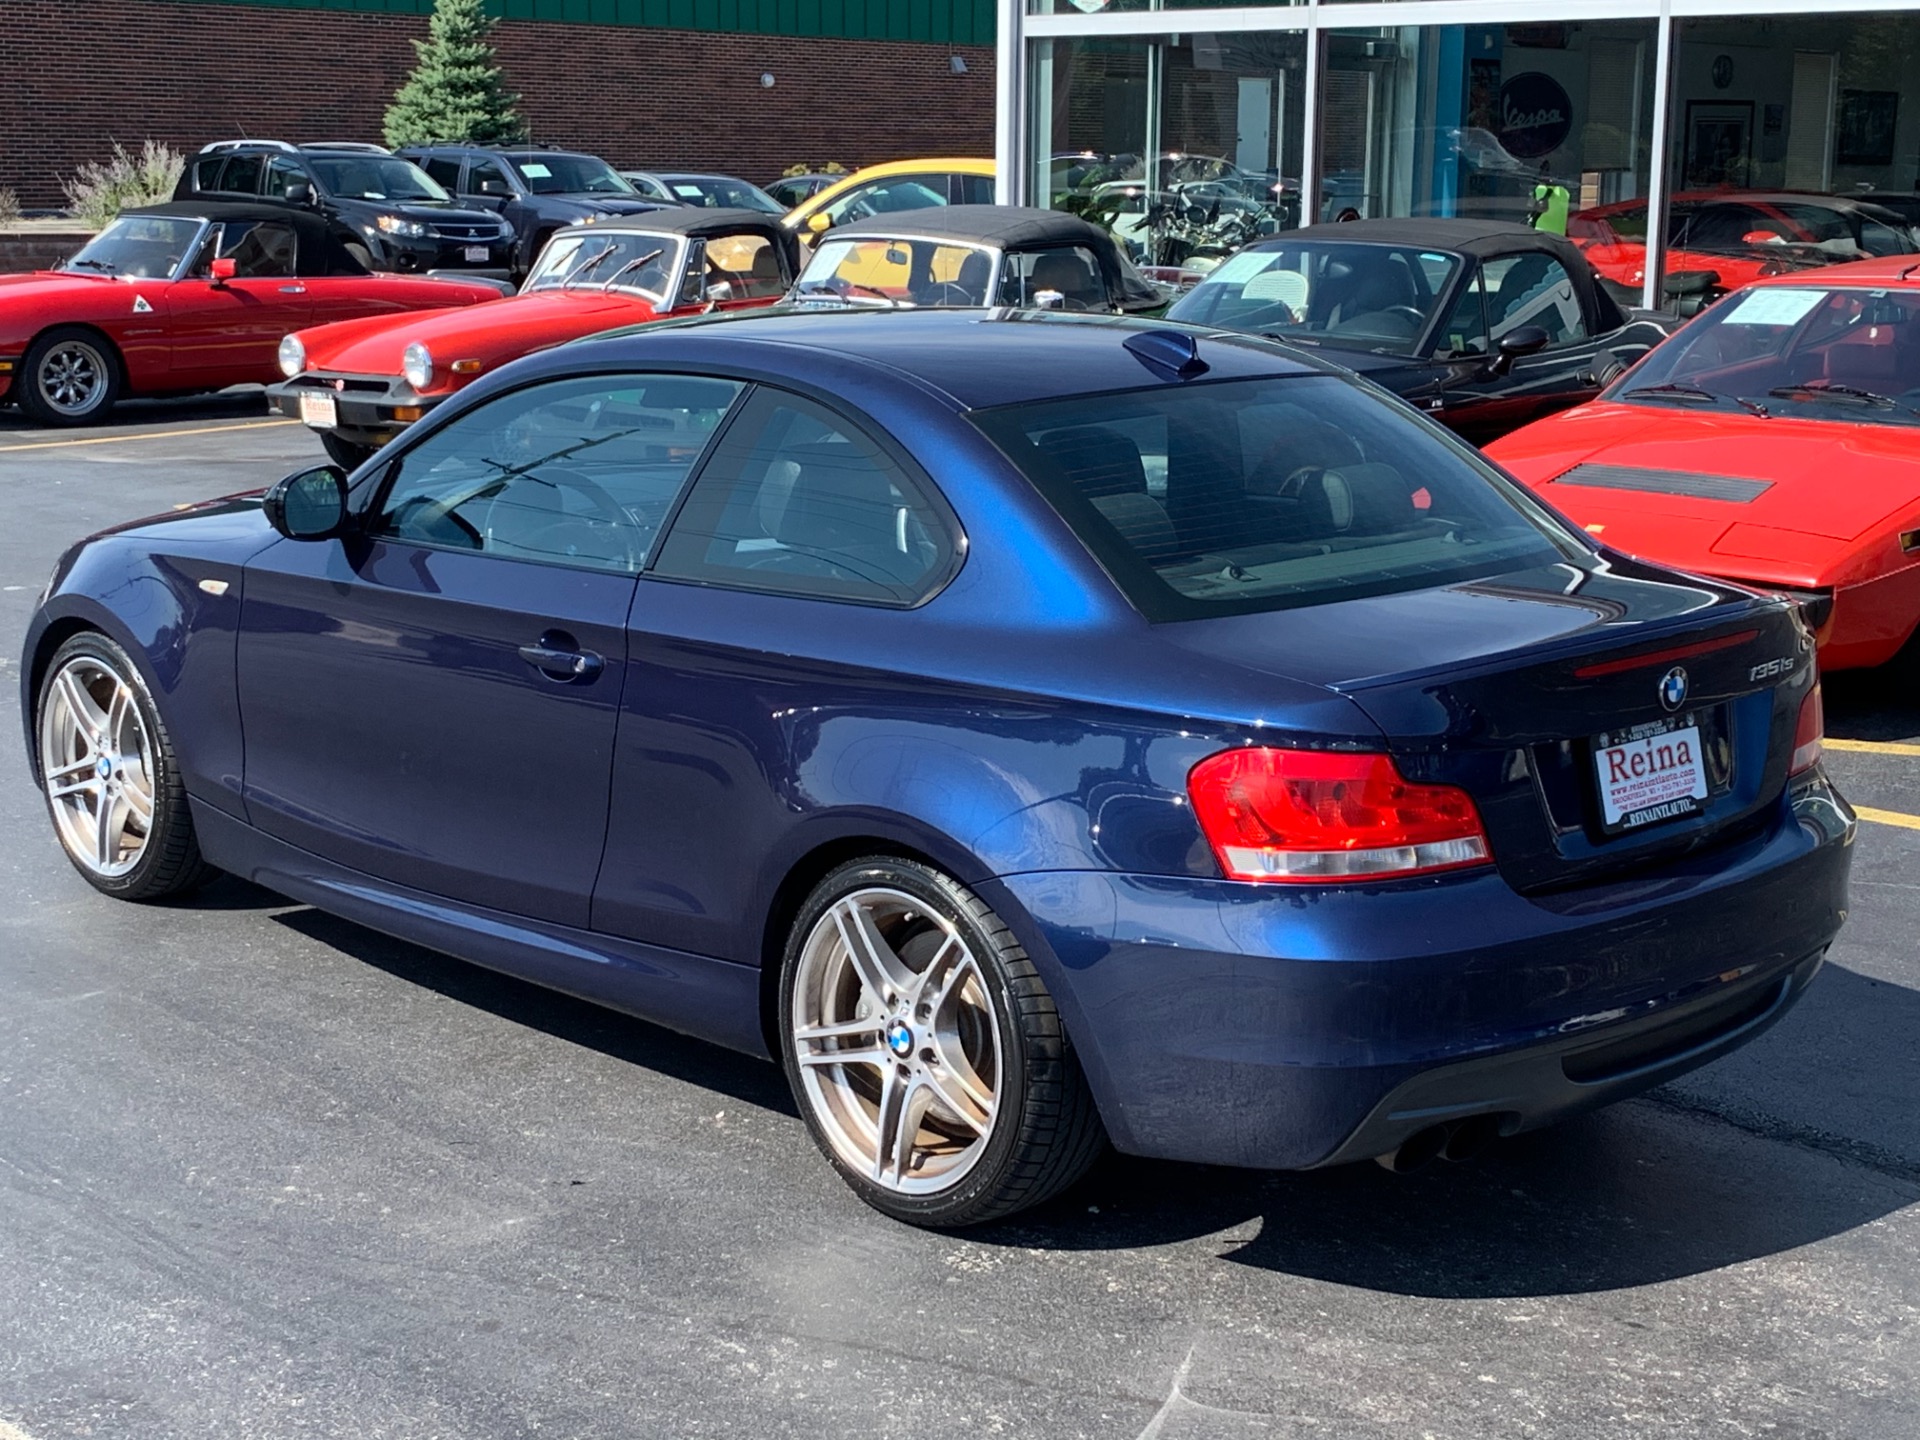 2013 BMW 1 Series 135is Stock # 3663 for sale near Brookfield, WI | WI